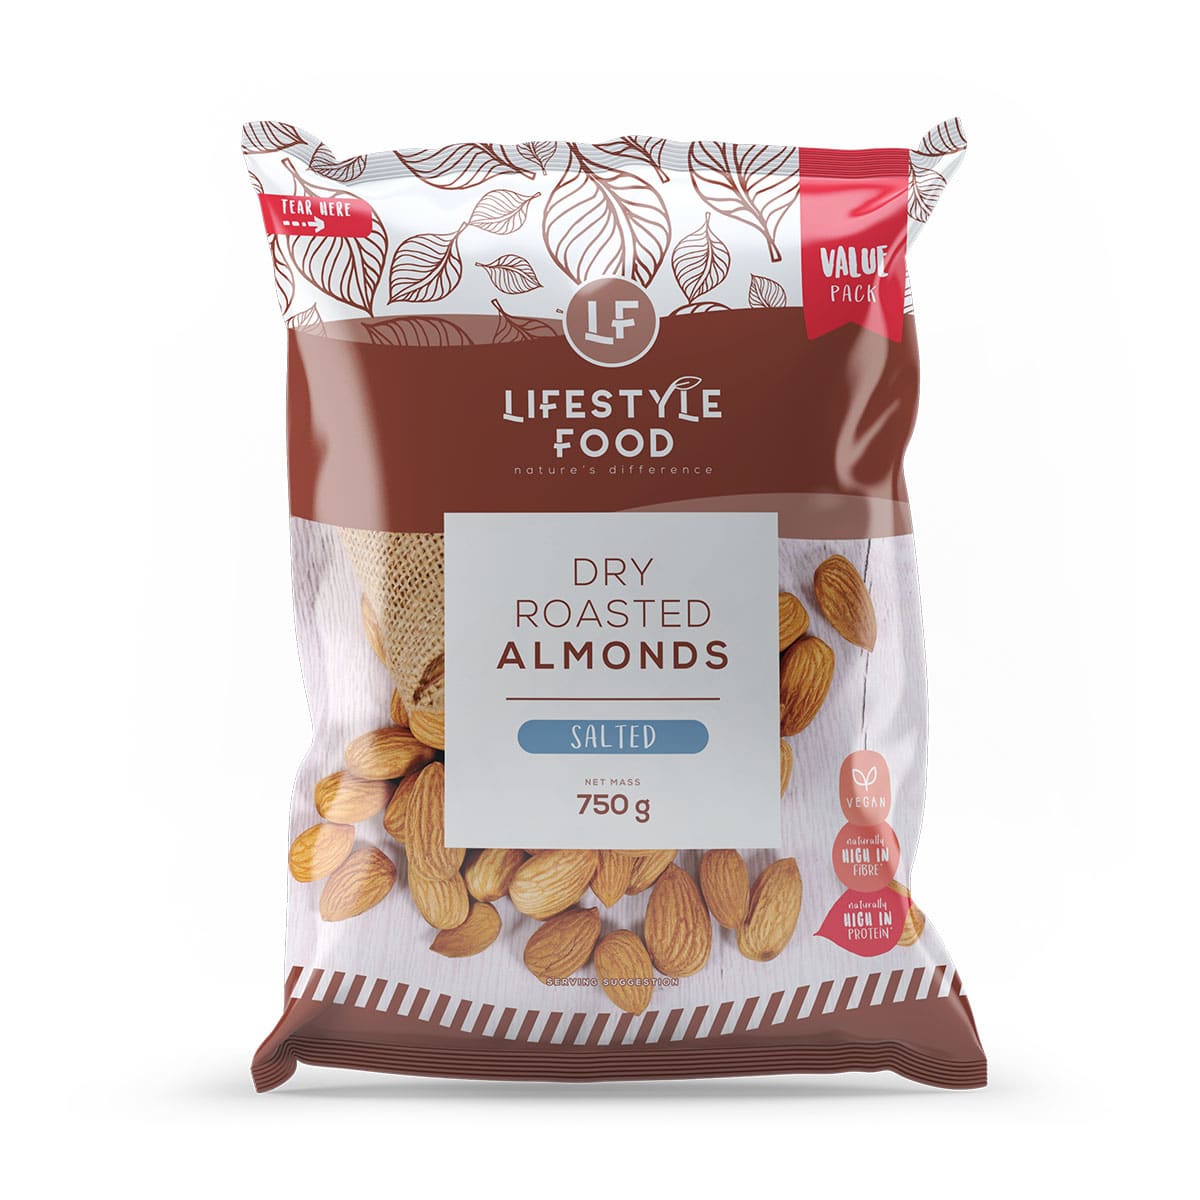 Lifestyle Food Dry Roasted Almonds Value Pack - 750g